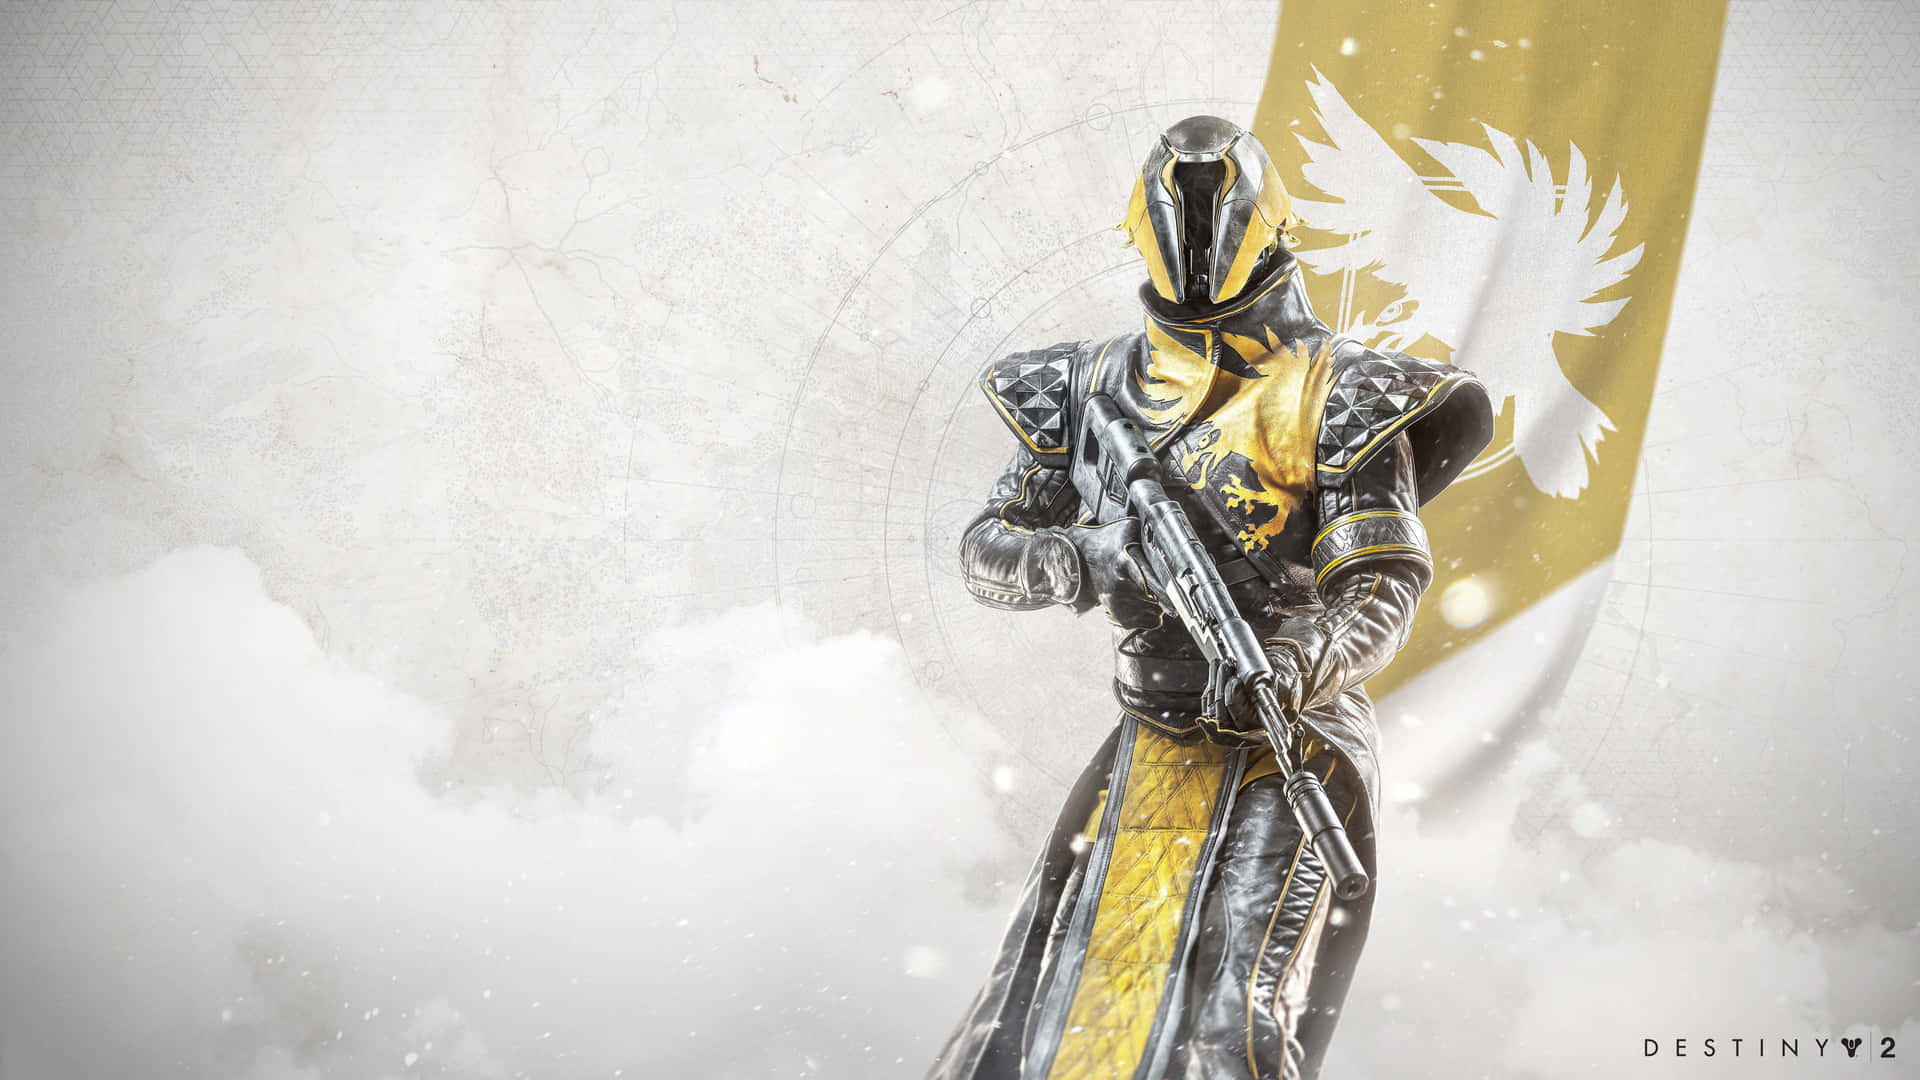 Raise your sword and become a Guardian of Destiny 2